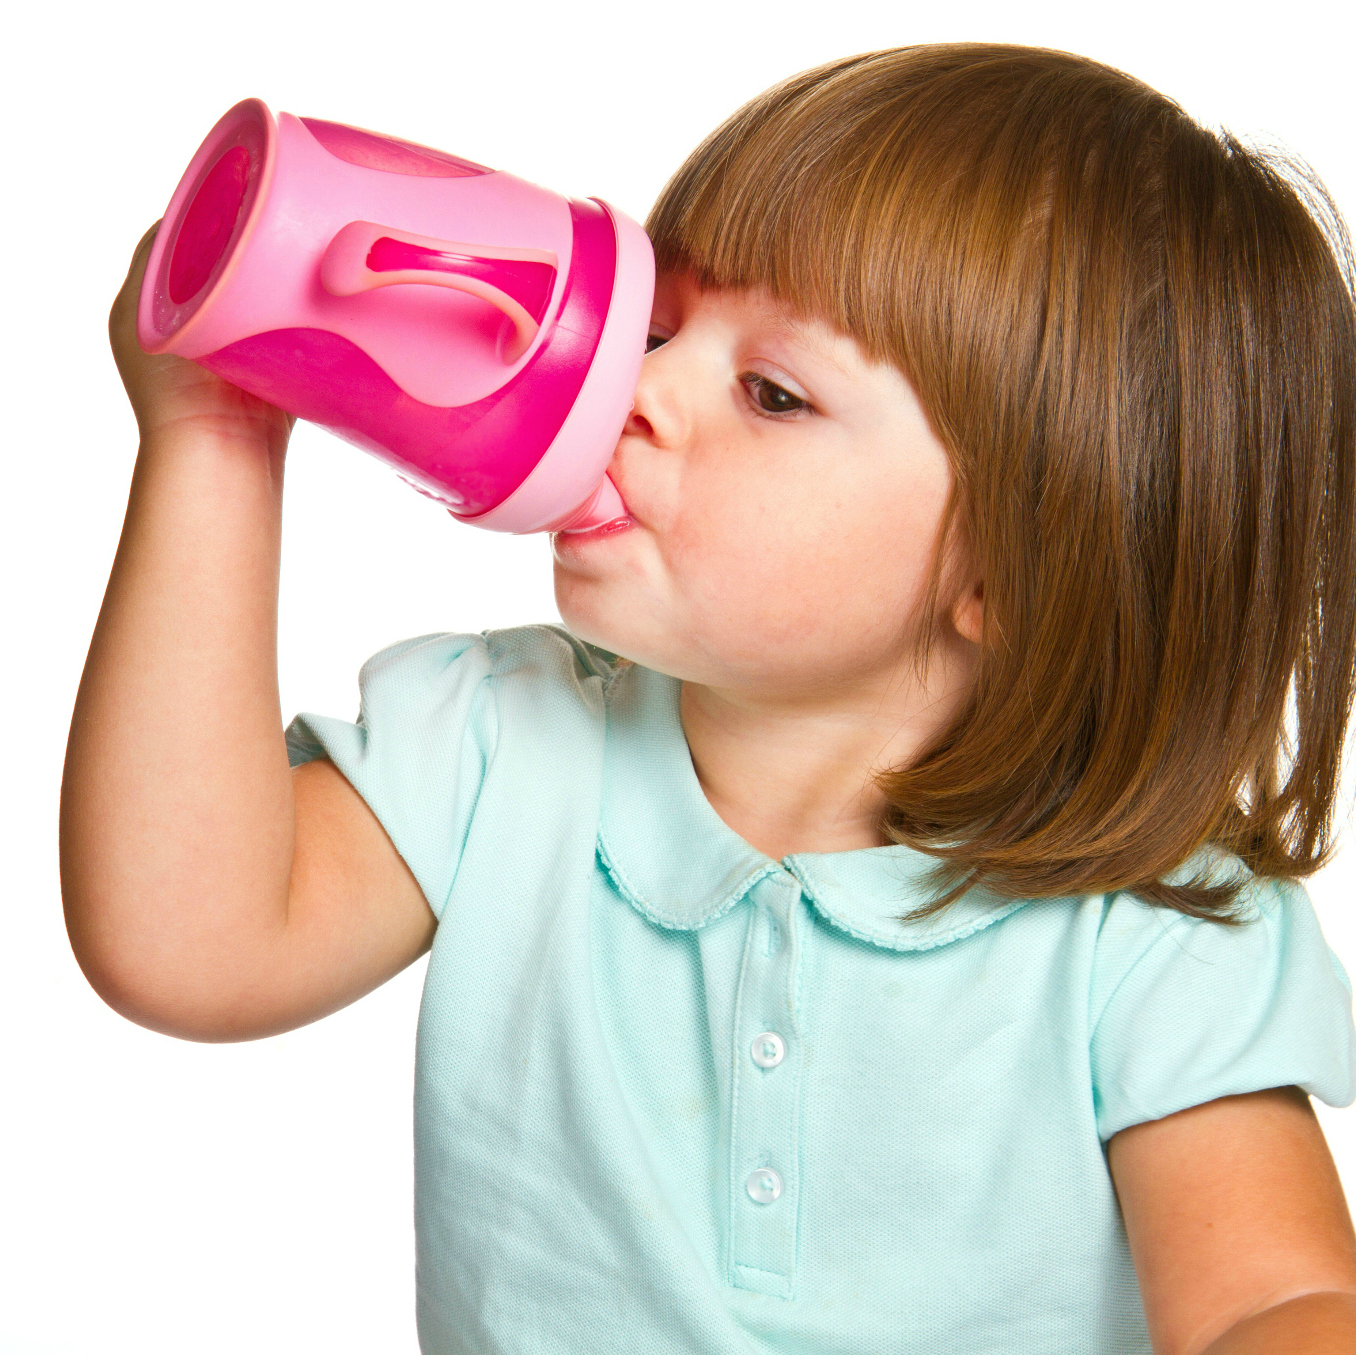 From Bottle to Cup: Helping Your Child Make a Healthy Transition